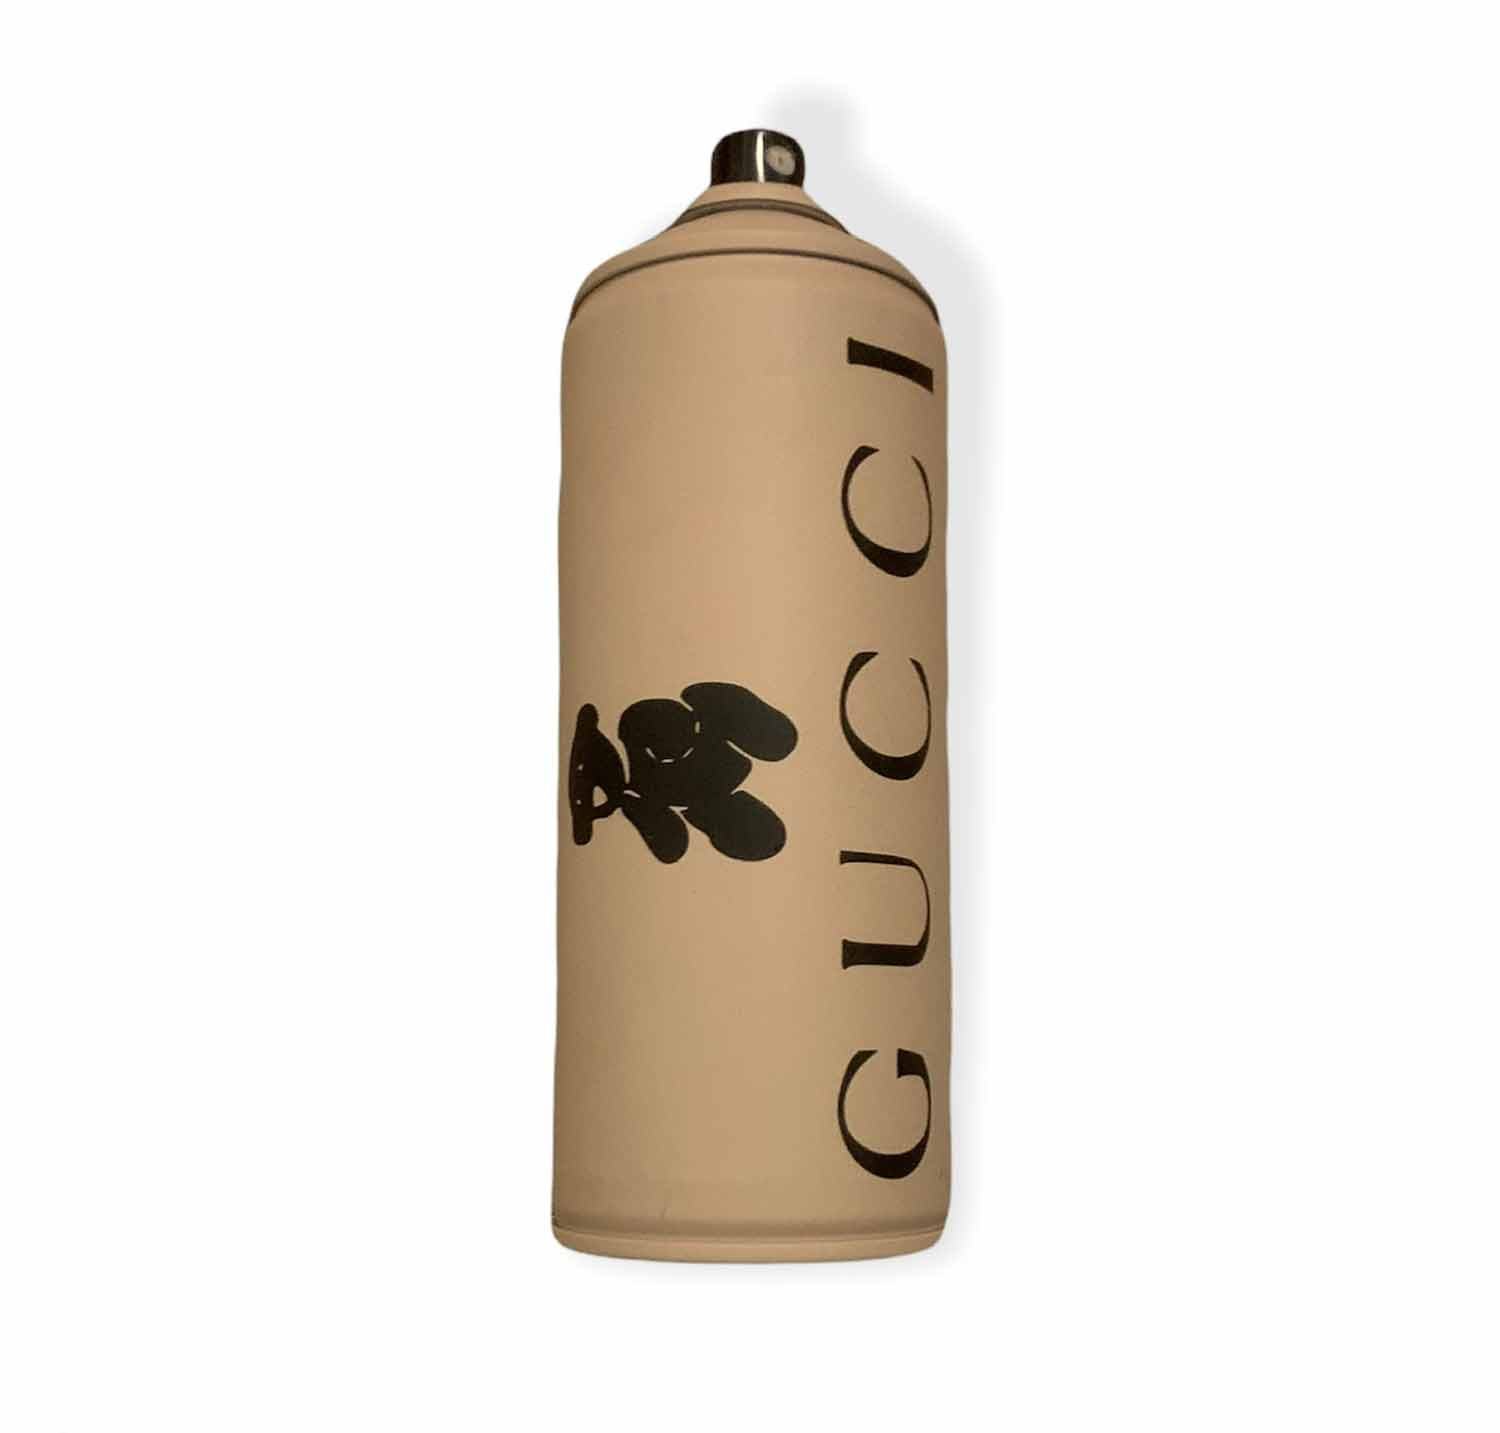 Gucci, Other, Gucci Water Bottle